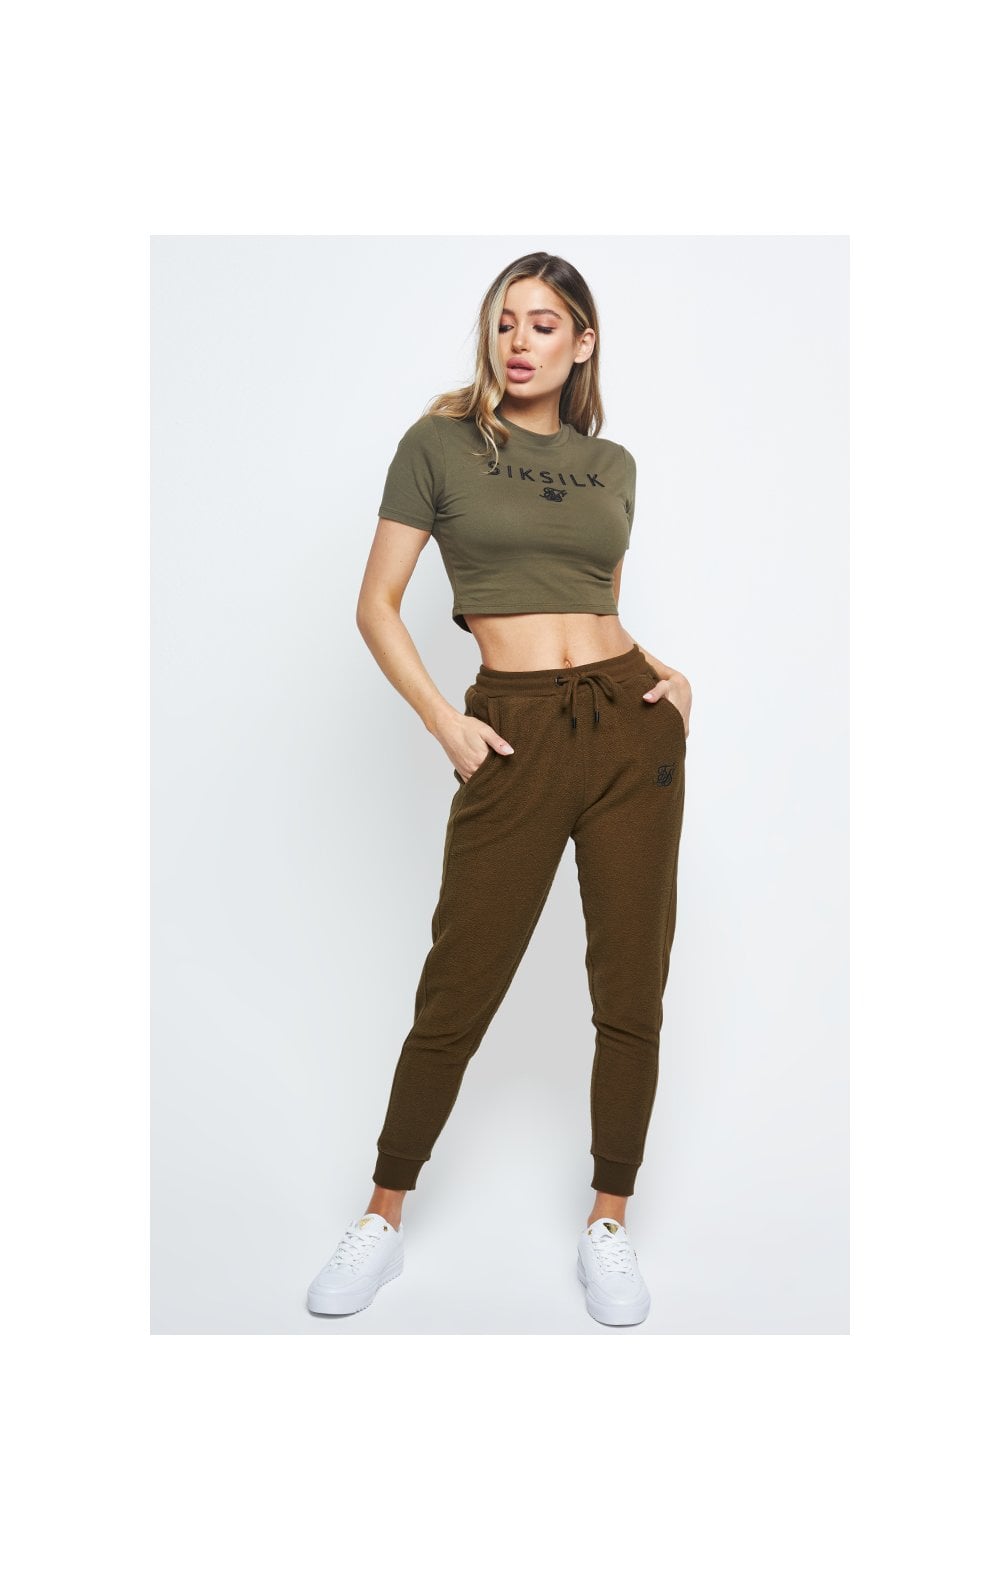 Load image into Gallery viewer, SikSilk Embroidered Crop Tee – Khaki (5)